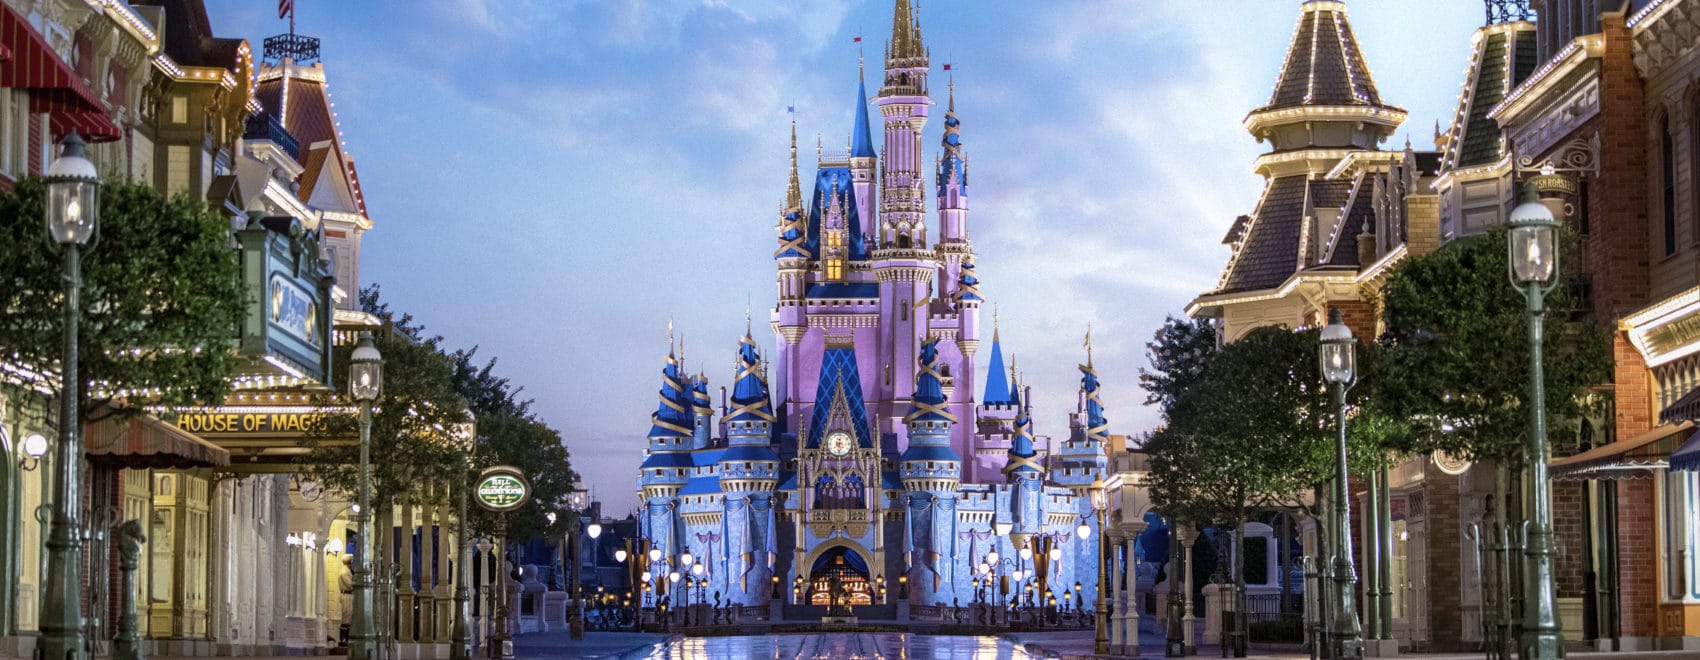 Looking for discounted tickets and packages? These Disney Deals will help you save on your next Disney vacation!